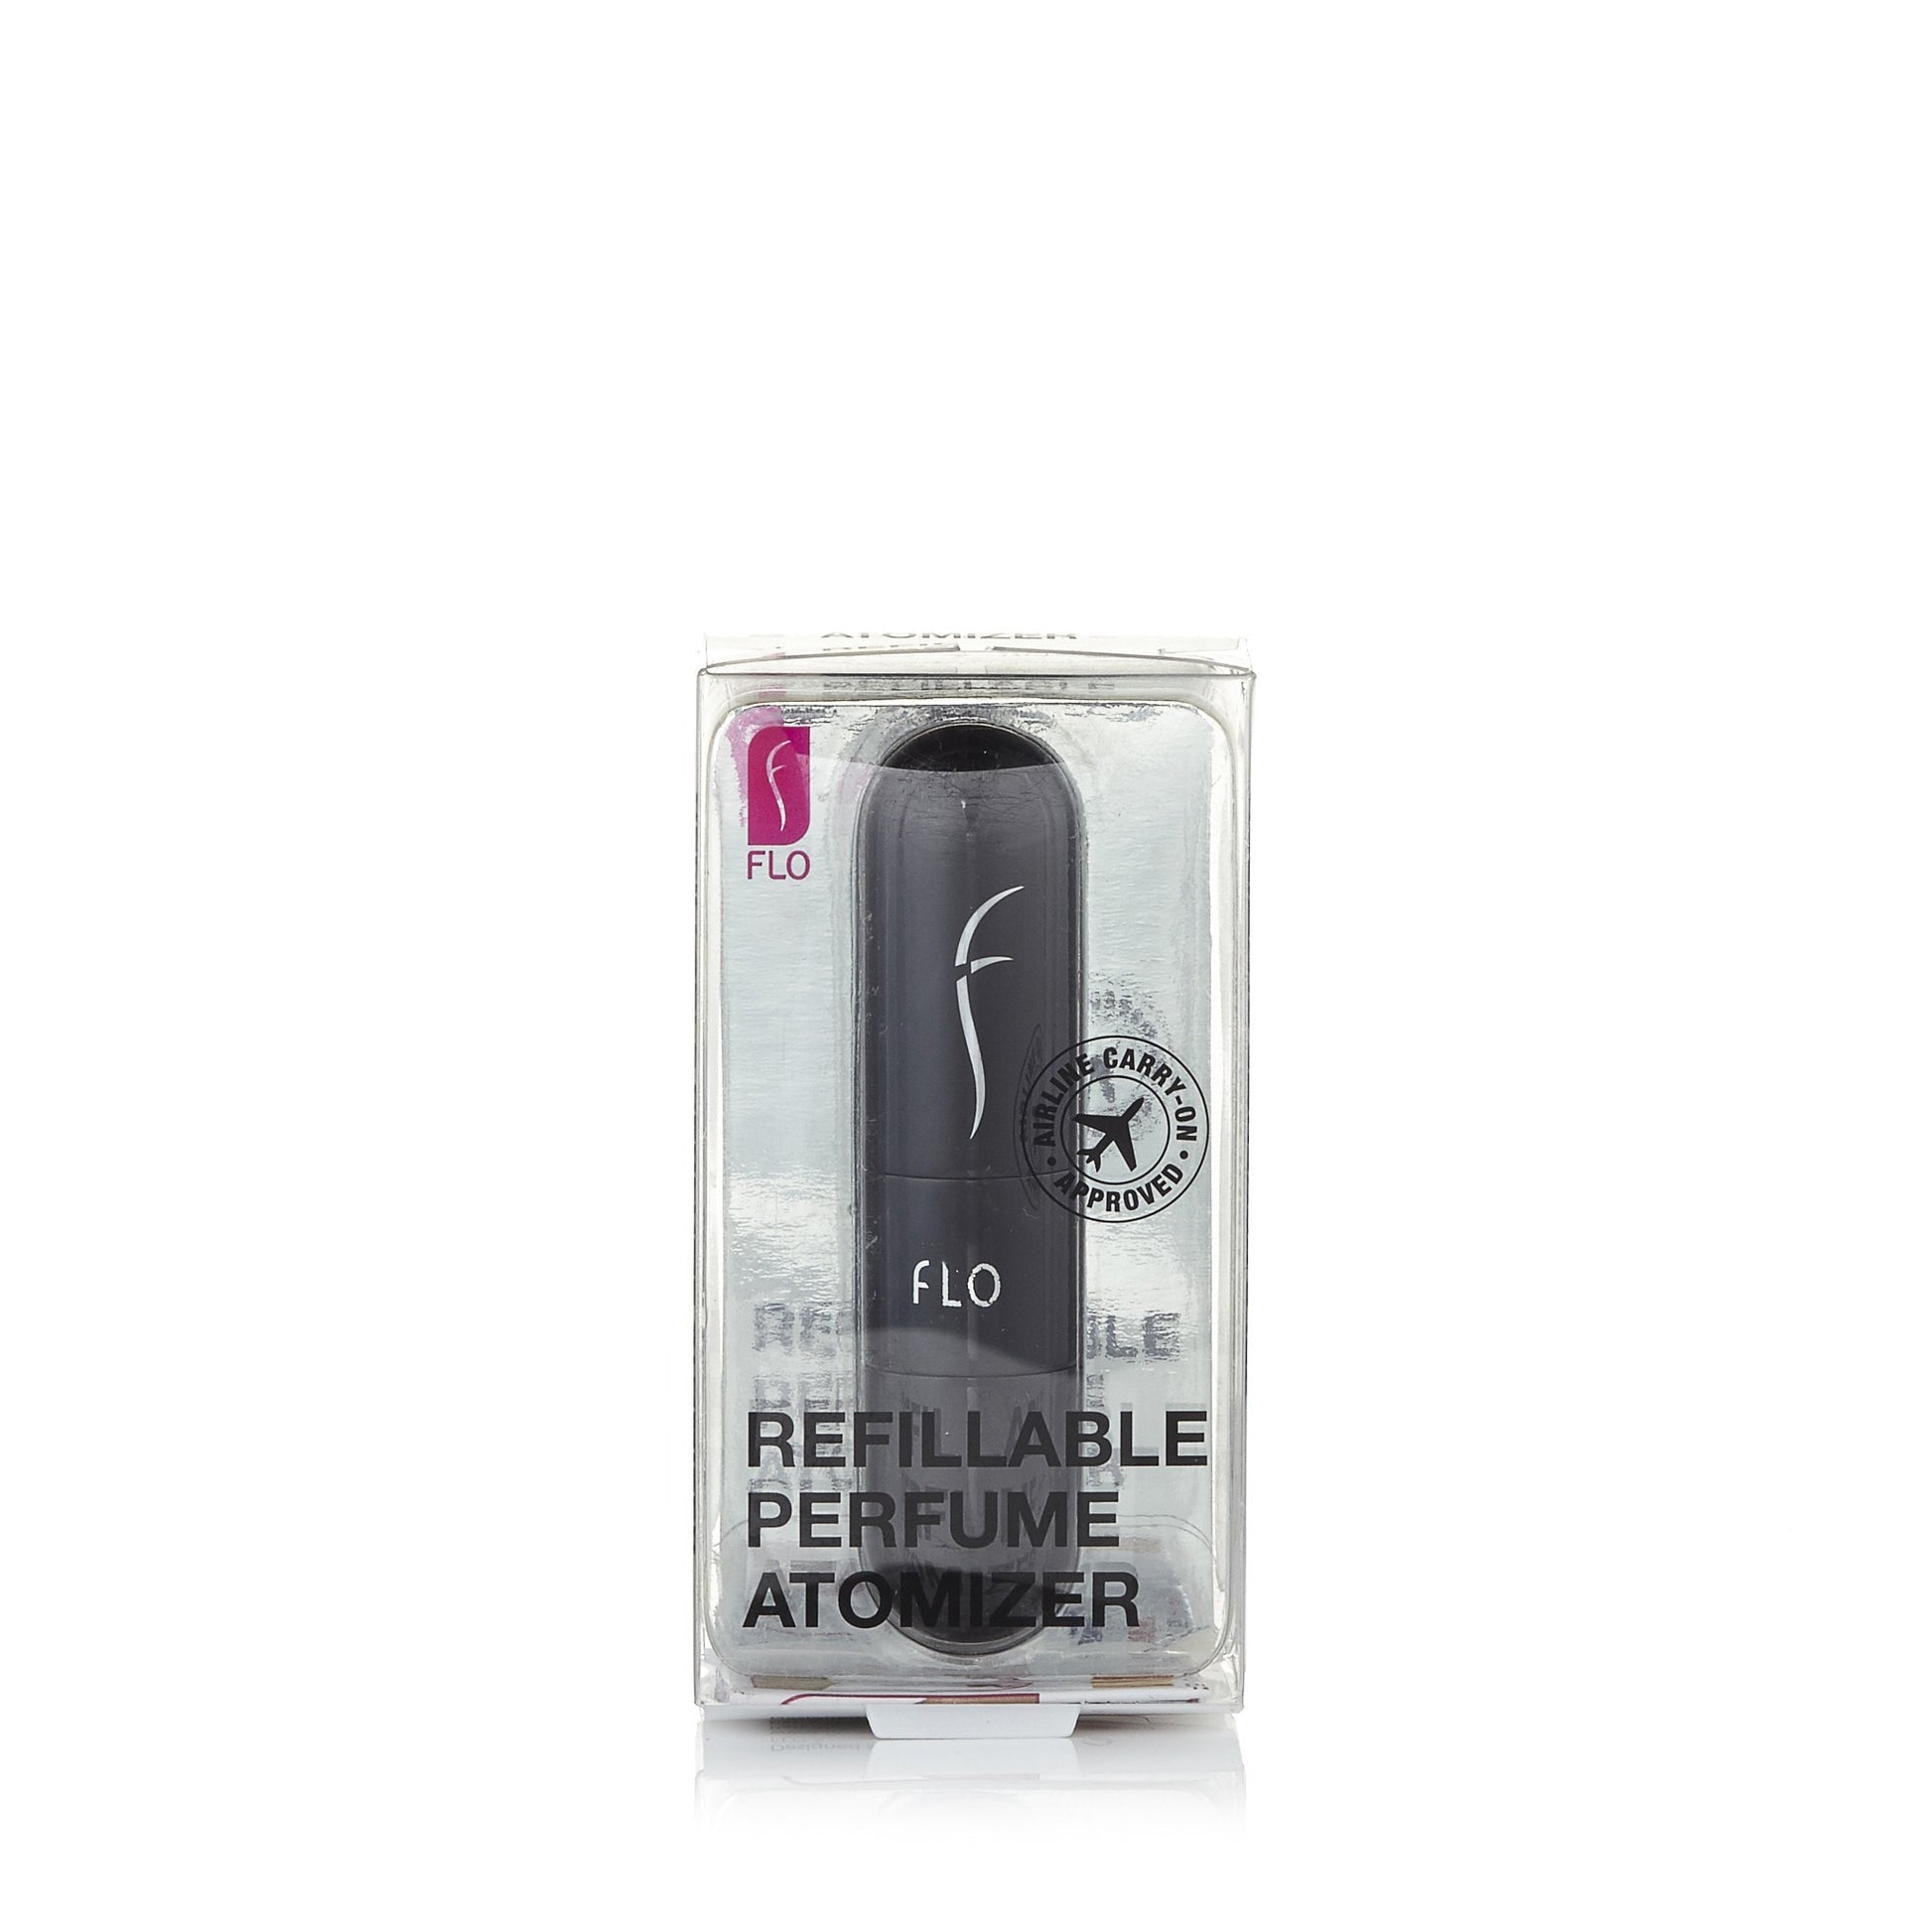 Refillable Perfume Atomizer by Flo Black Click to open in modal